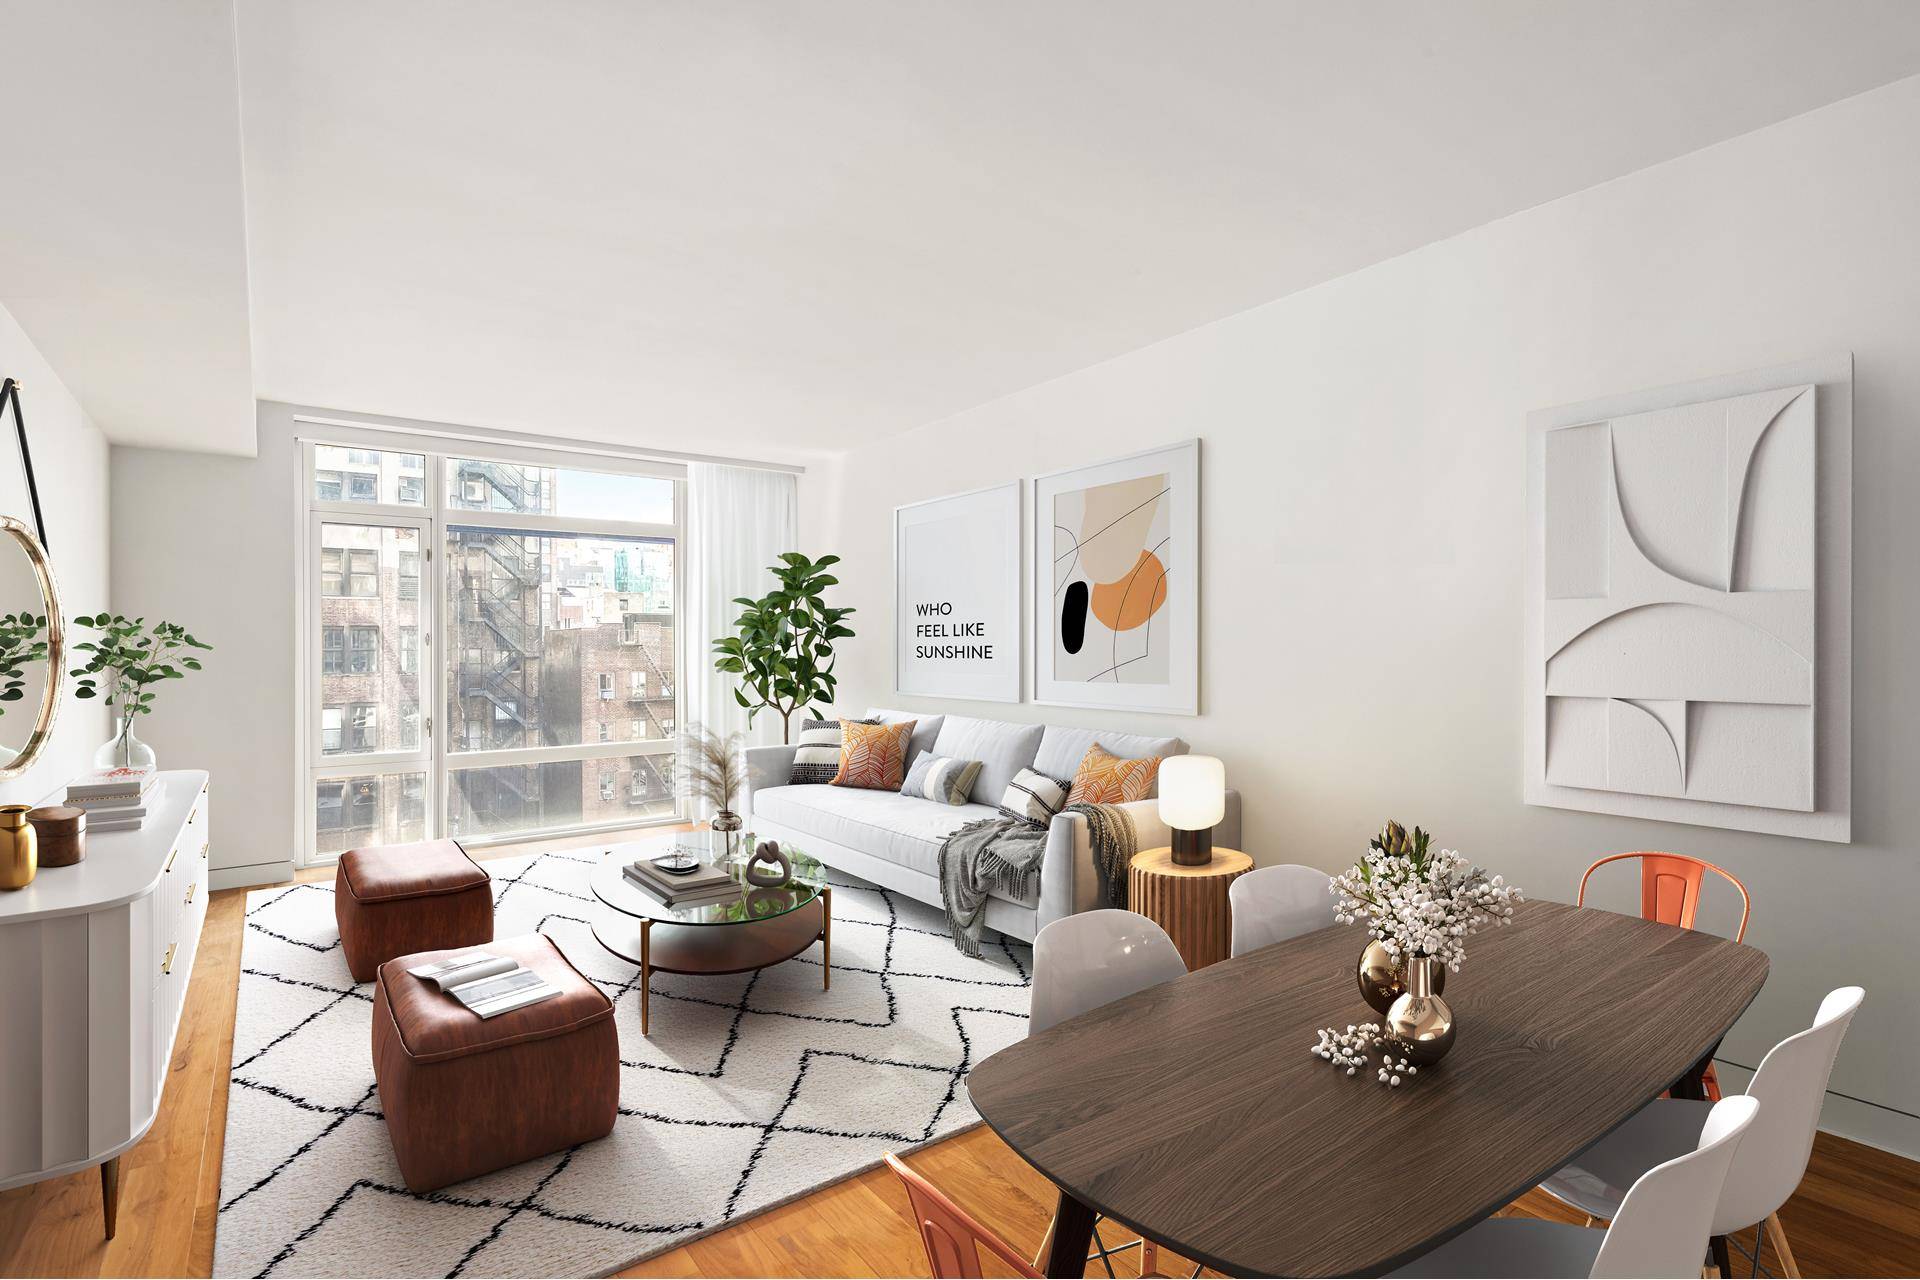 Live in the heart of Chelsea, the Chelsea Green is a LEED Gold certified boutique condo building with impeccably designed residences and features superior energy efficient double paned windows, a ...